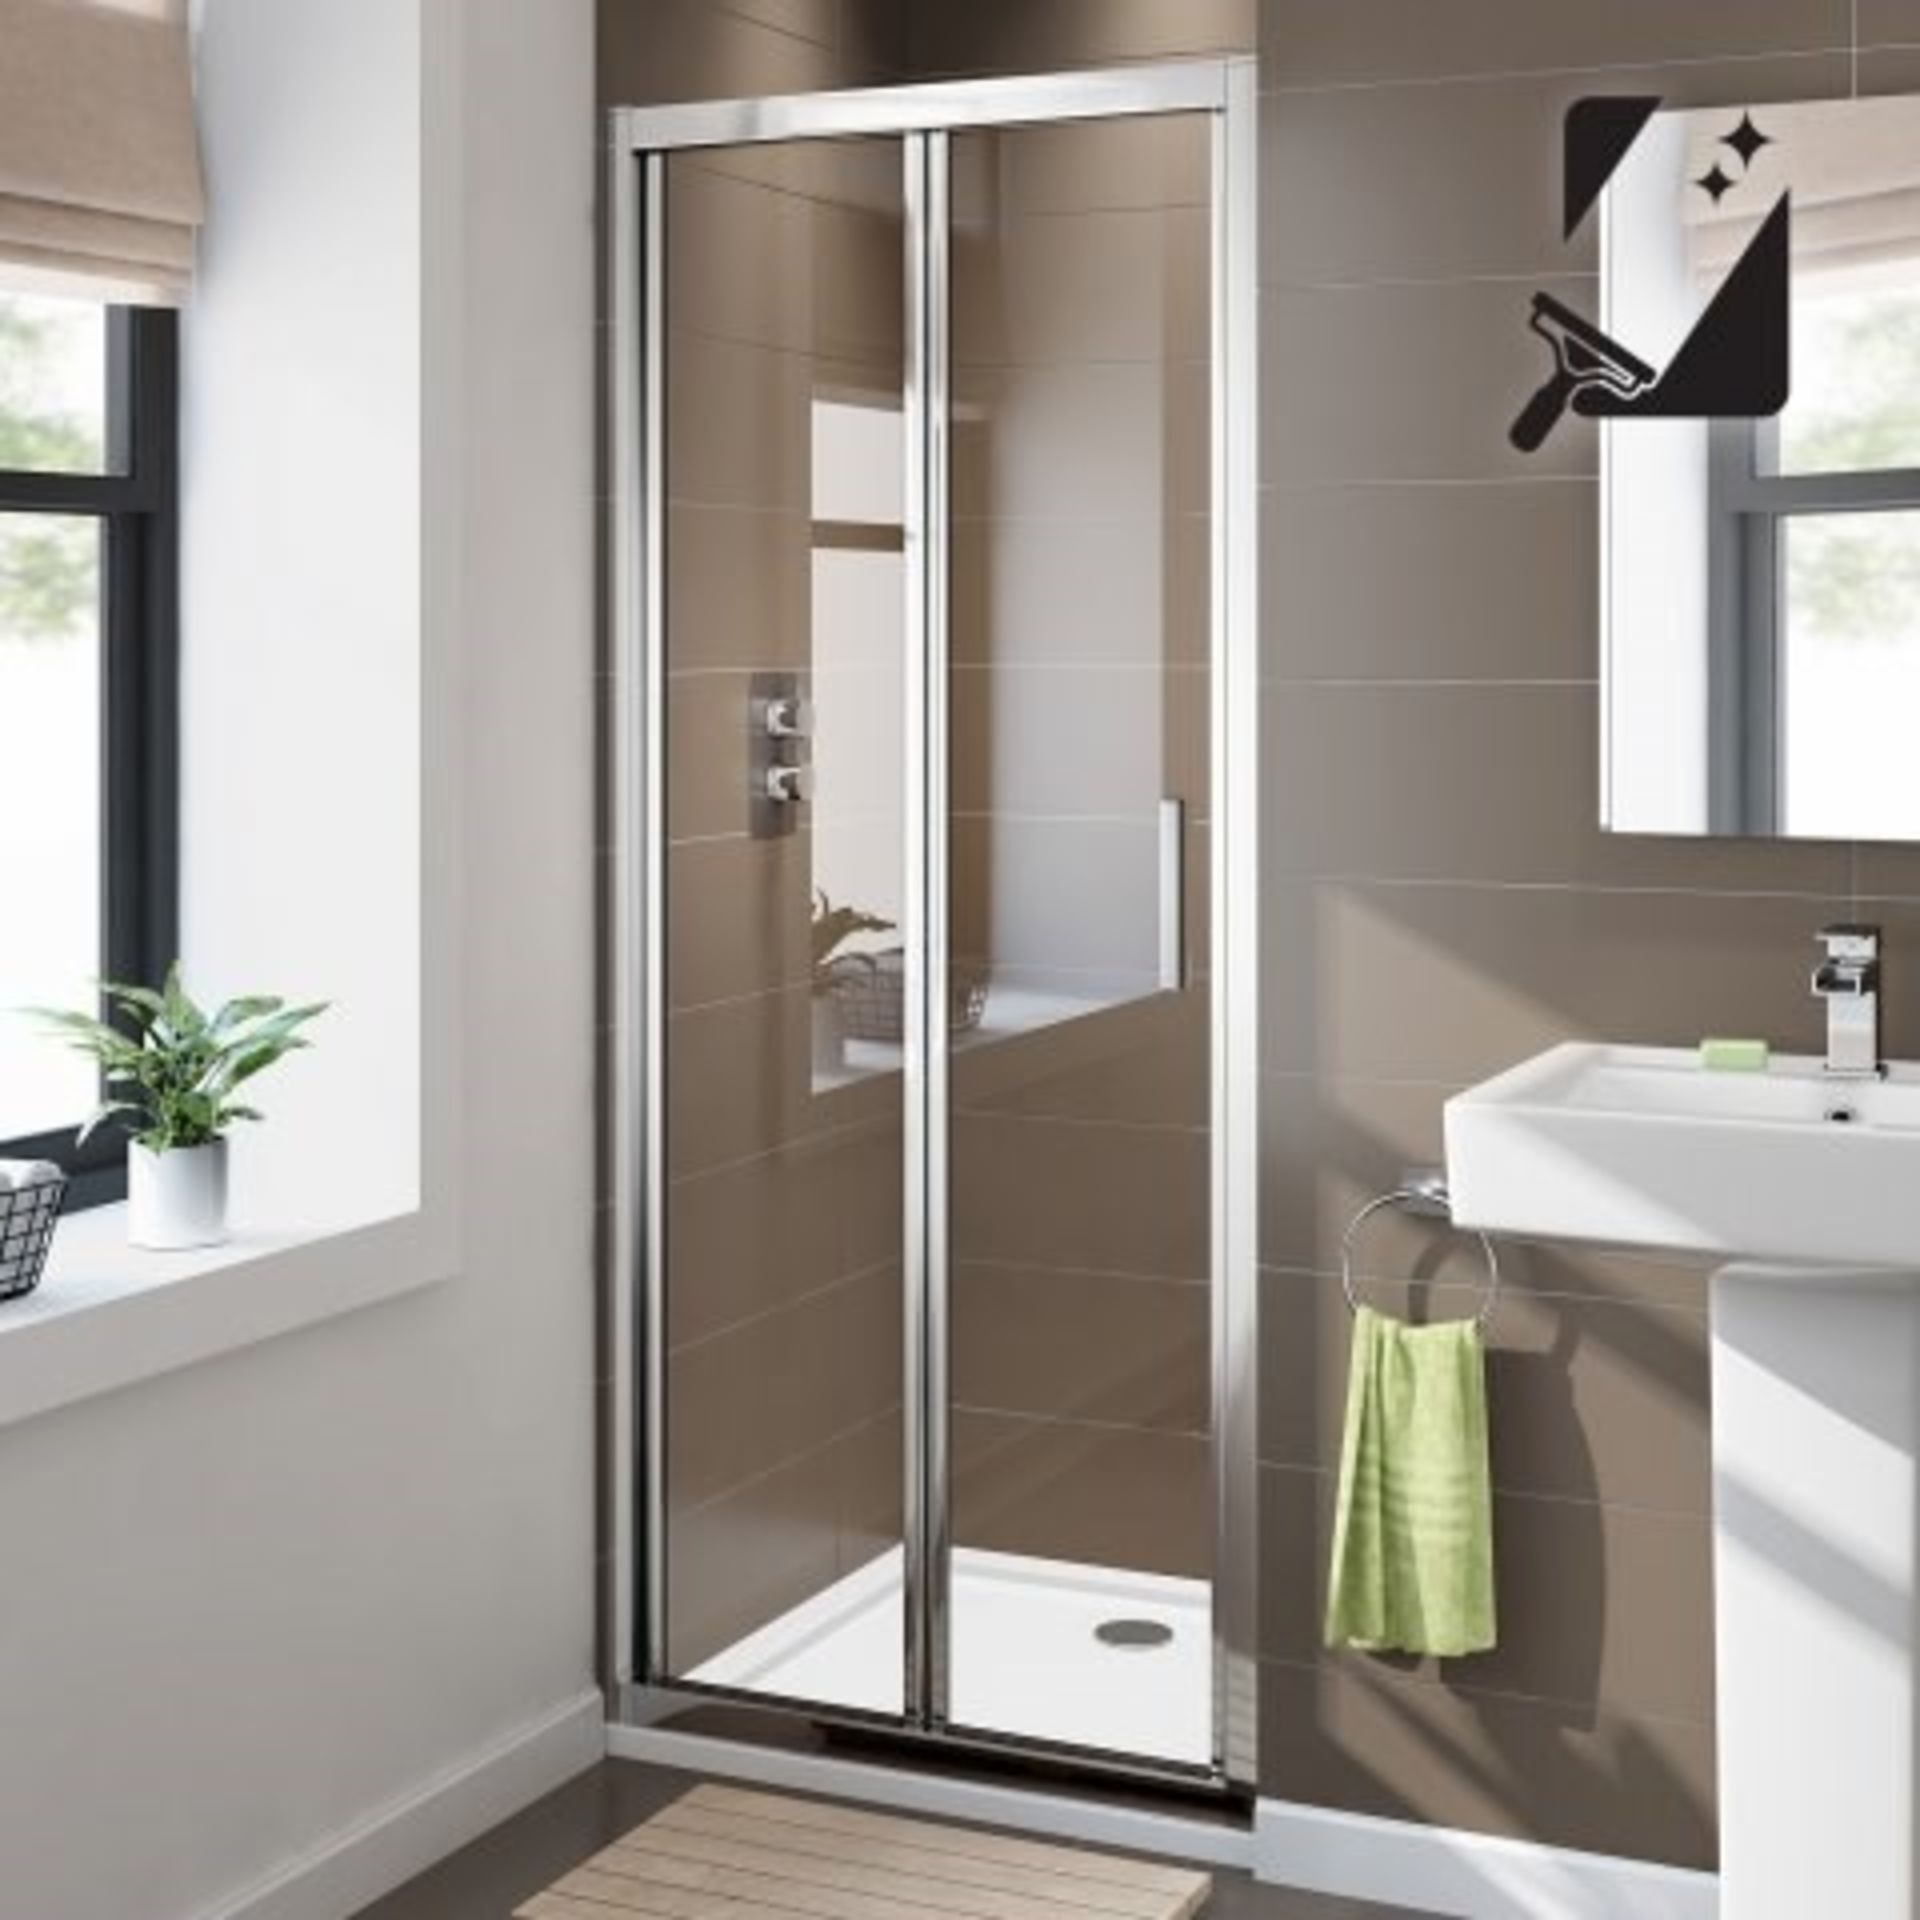 New (Q68) 760 mm - 8 mm - Premium Easy clean Bifold Shower Door. RRP £379.99.Durability To With... - Image 2 of 2